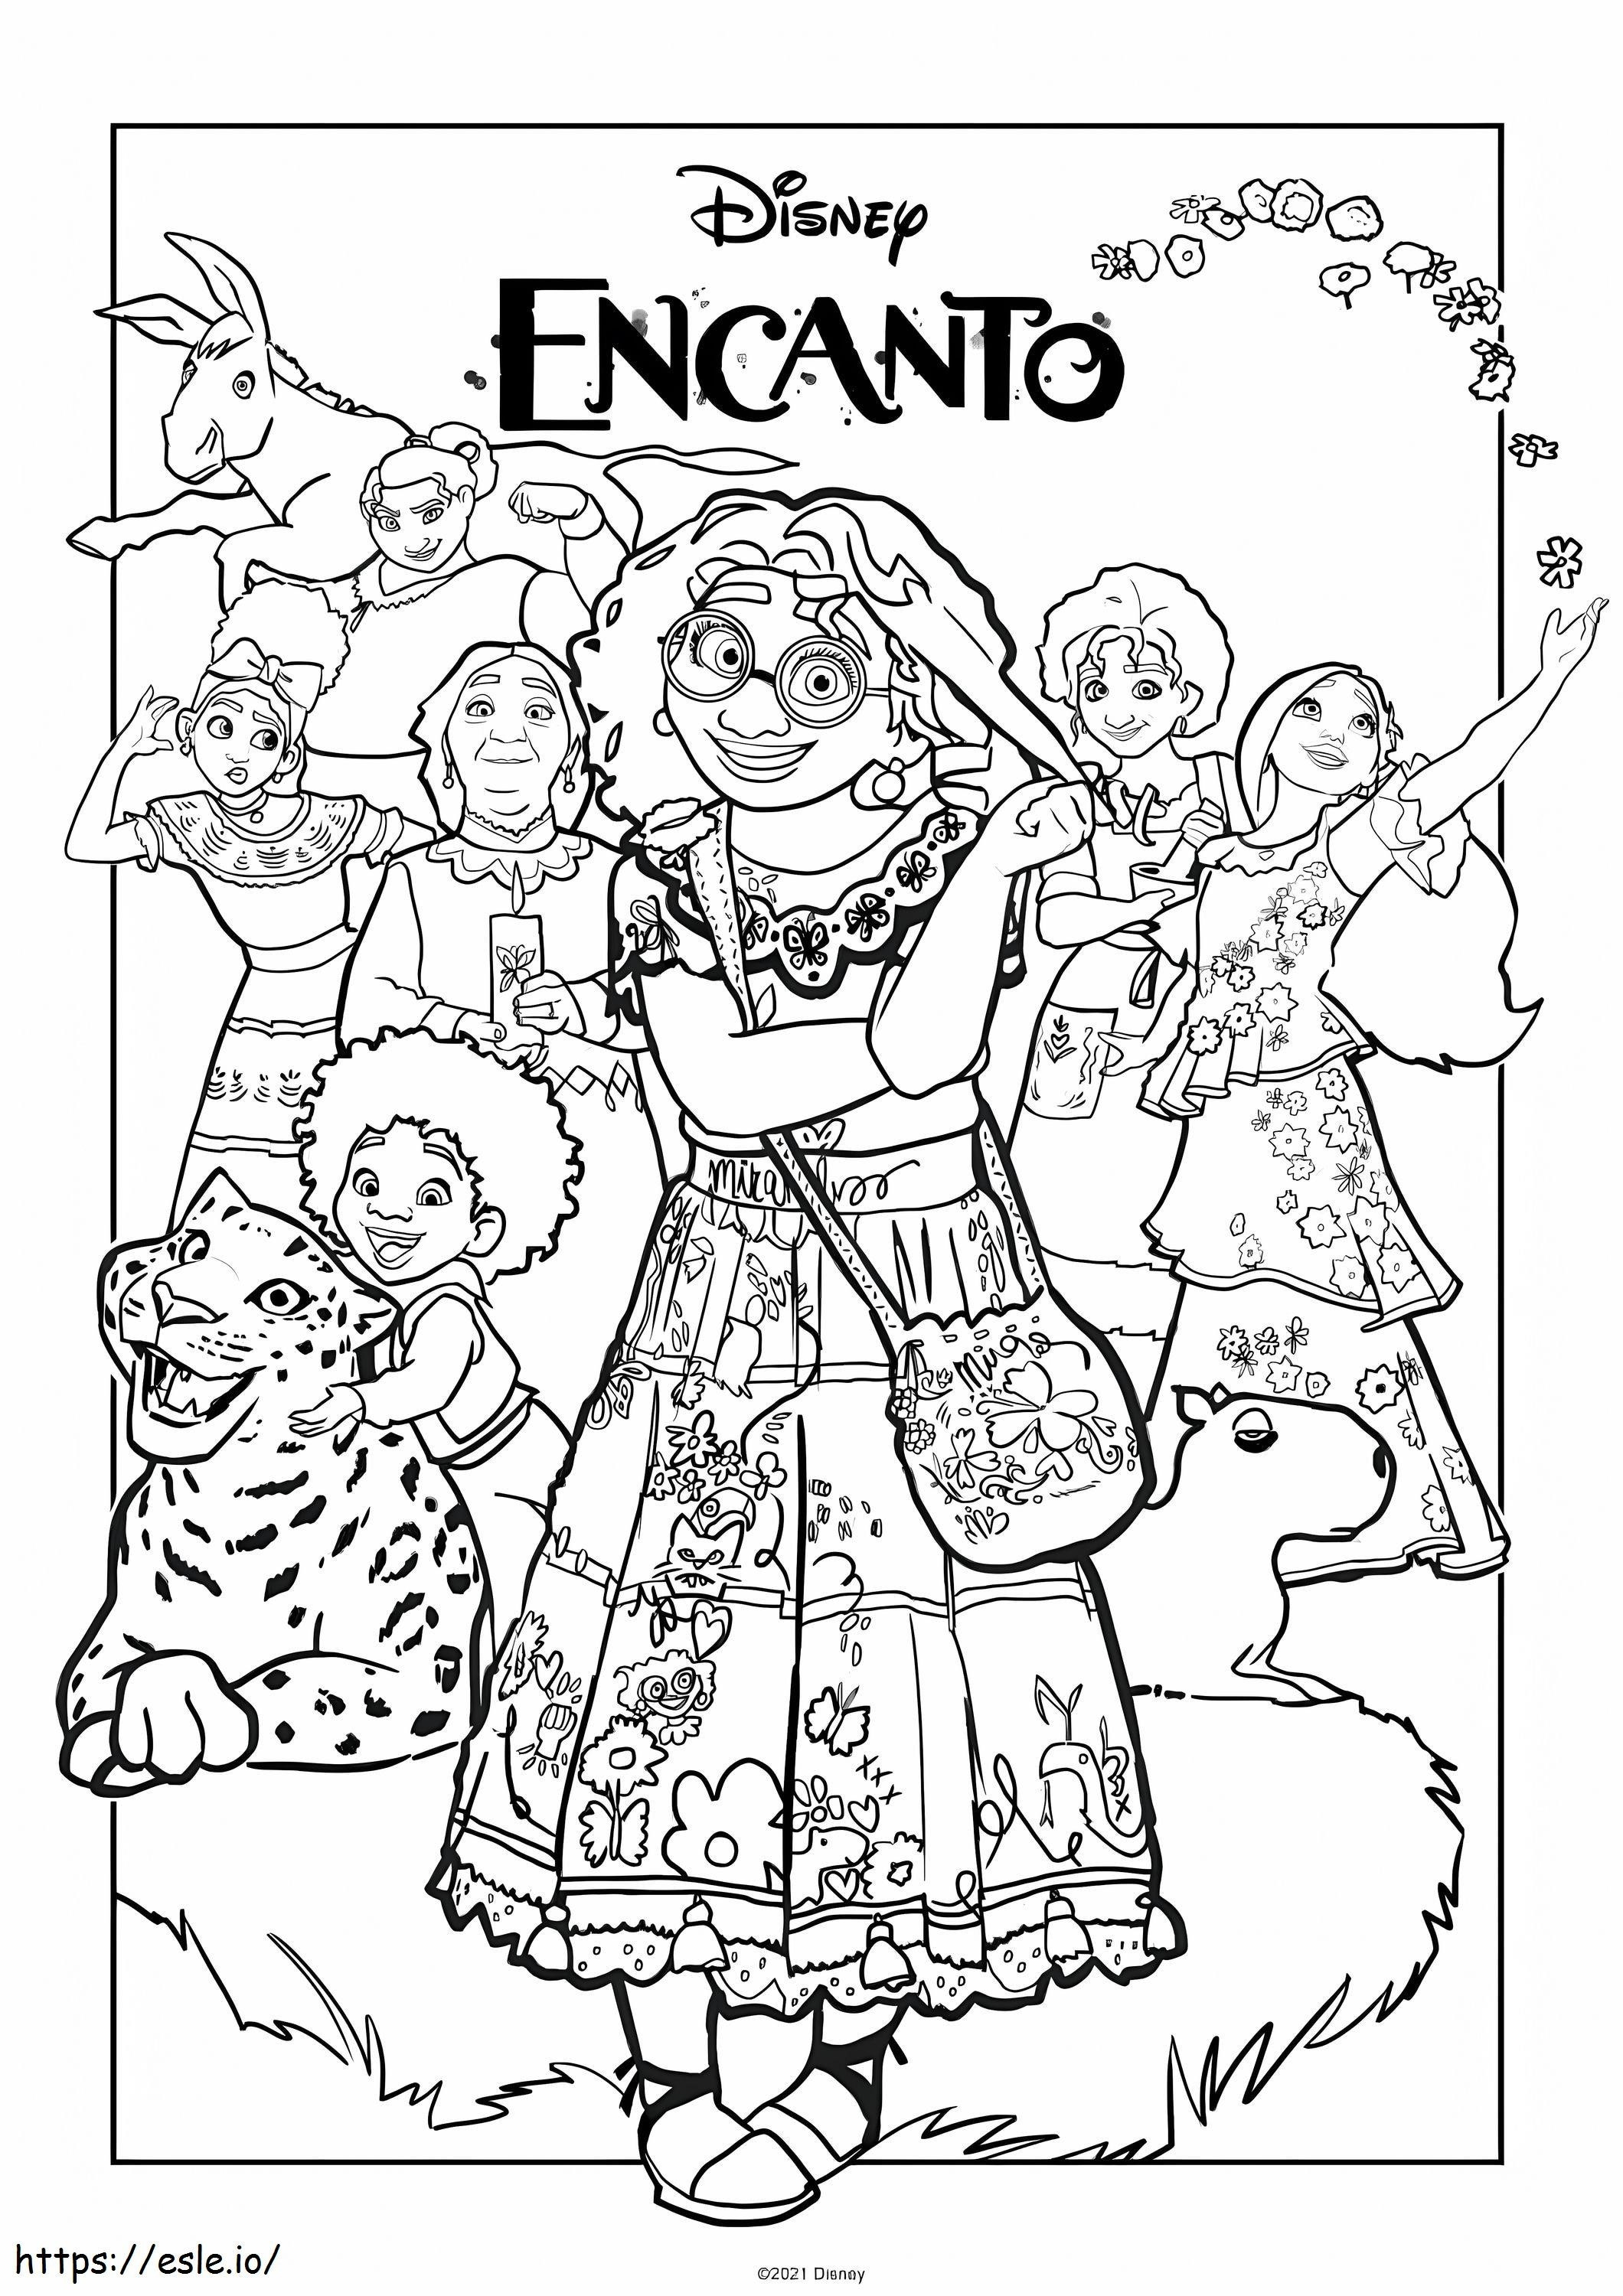 Cartoon Family coloring page